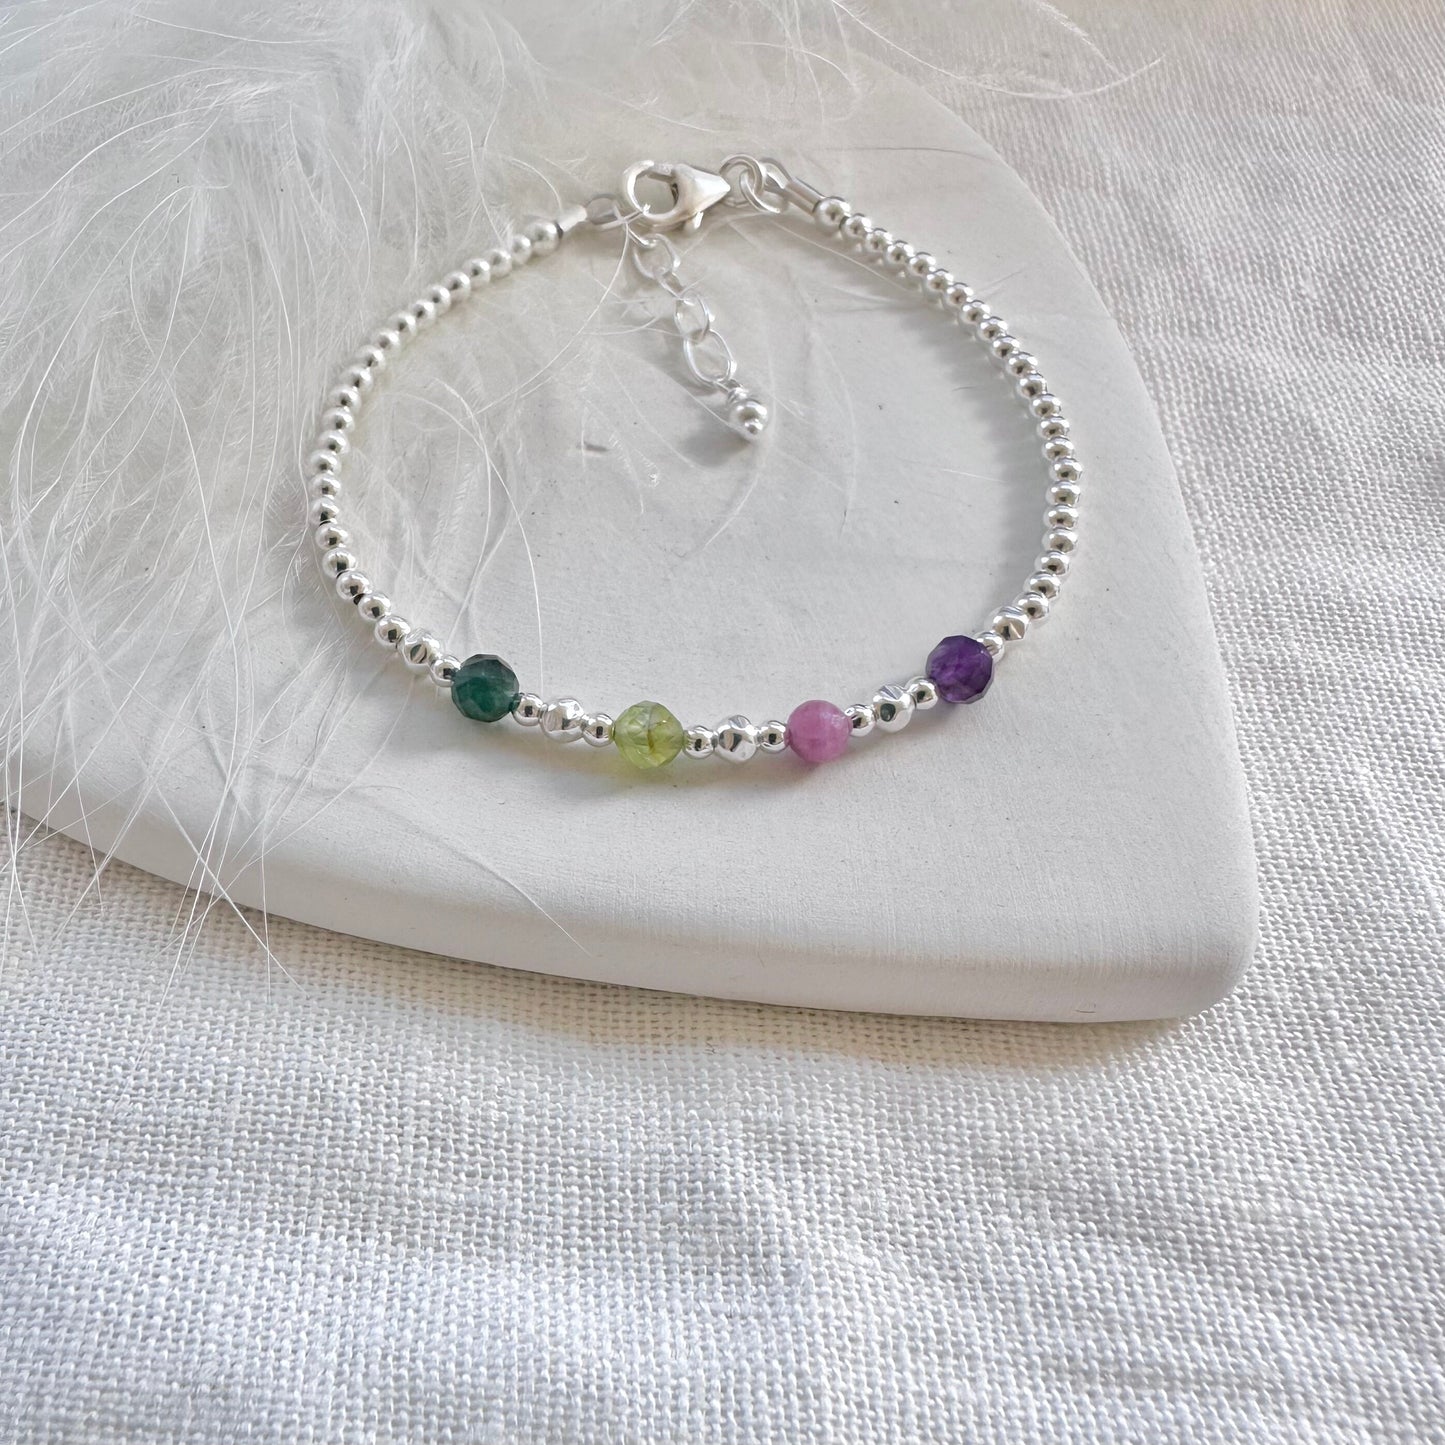 Birthstones Bracelet for Mum, meaningful gift for Mothering Sunday, nft, family birthstone jewellery in 2.5mm sterling silver